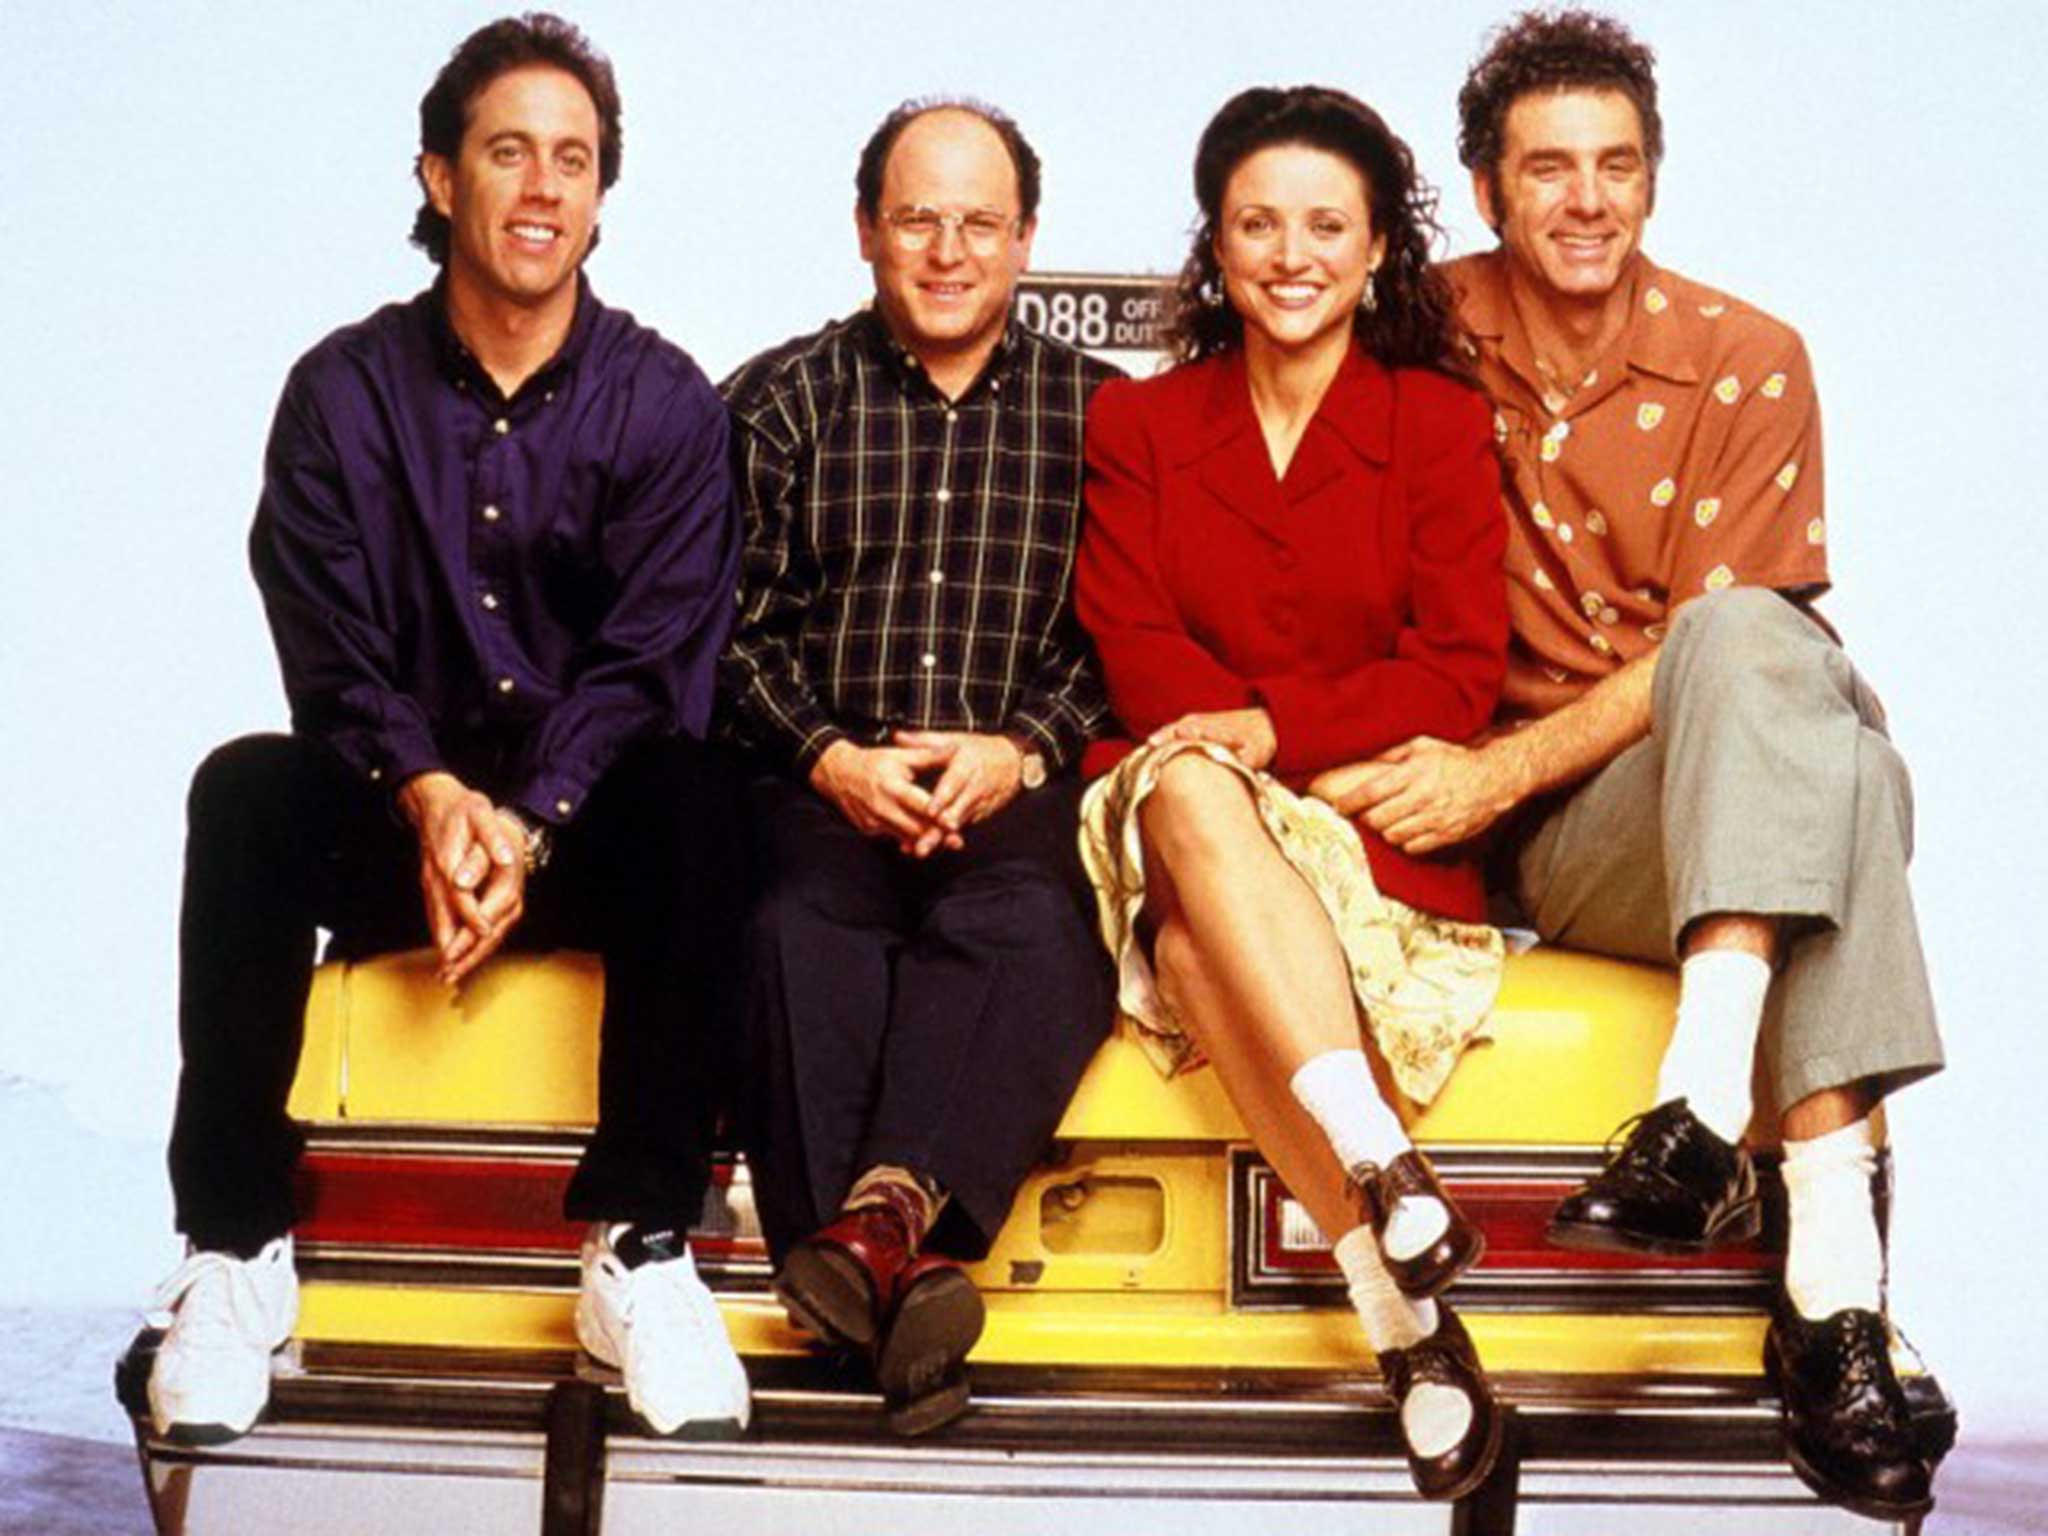 David was the inspiration for George Costanza in Seinfeld (centre left)